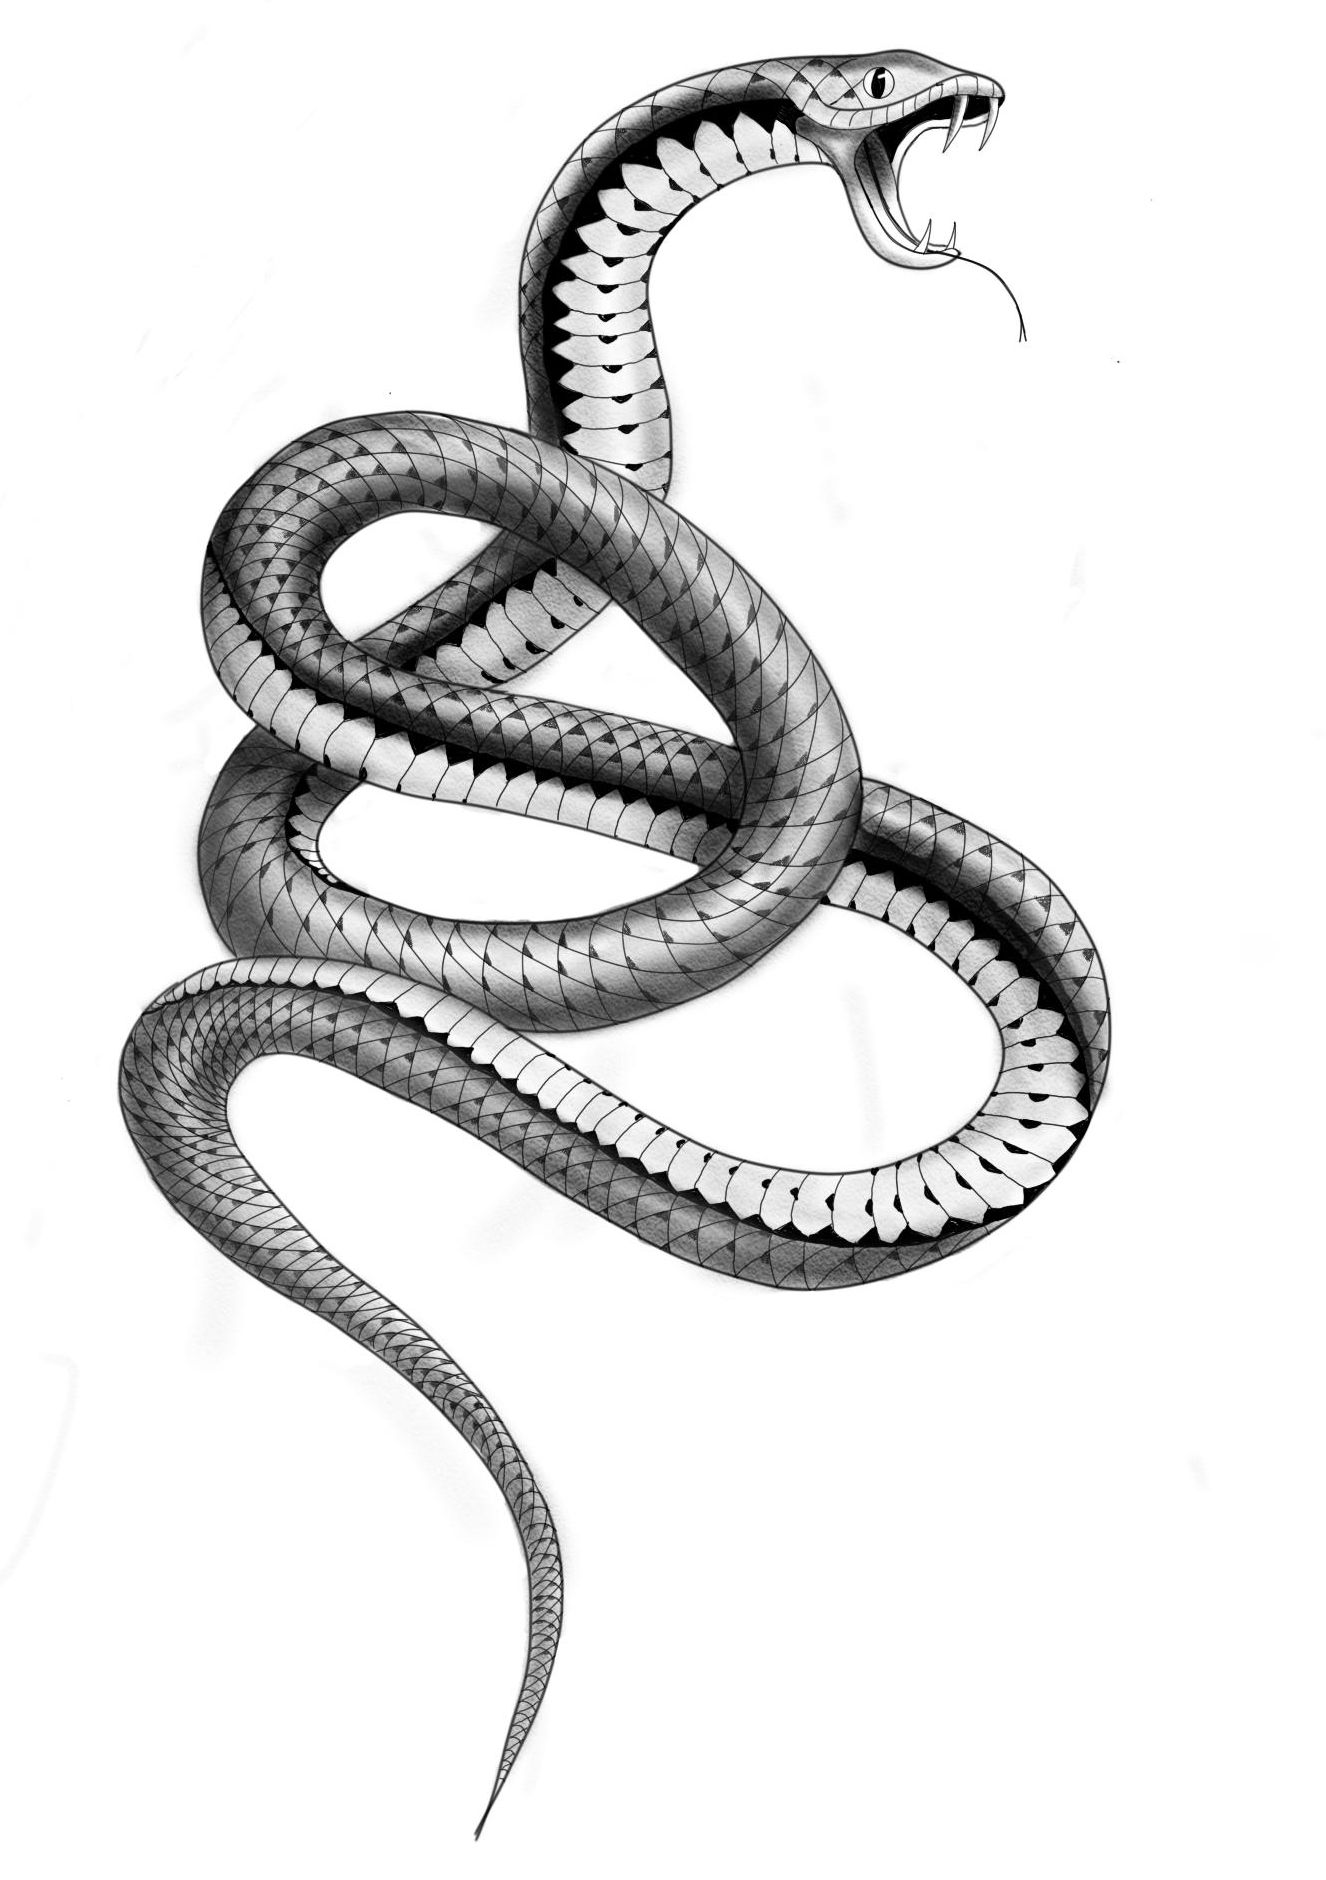 25 Easy Snake Drawing Ideas  How to Draw a Snake  Blitsy